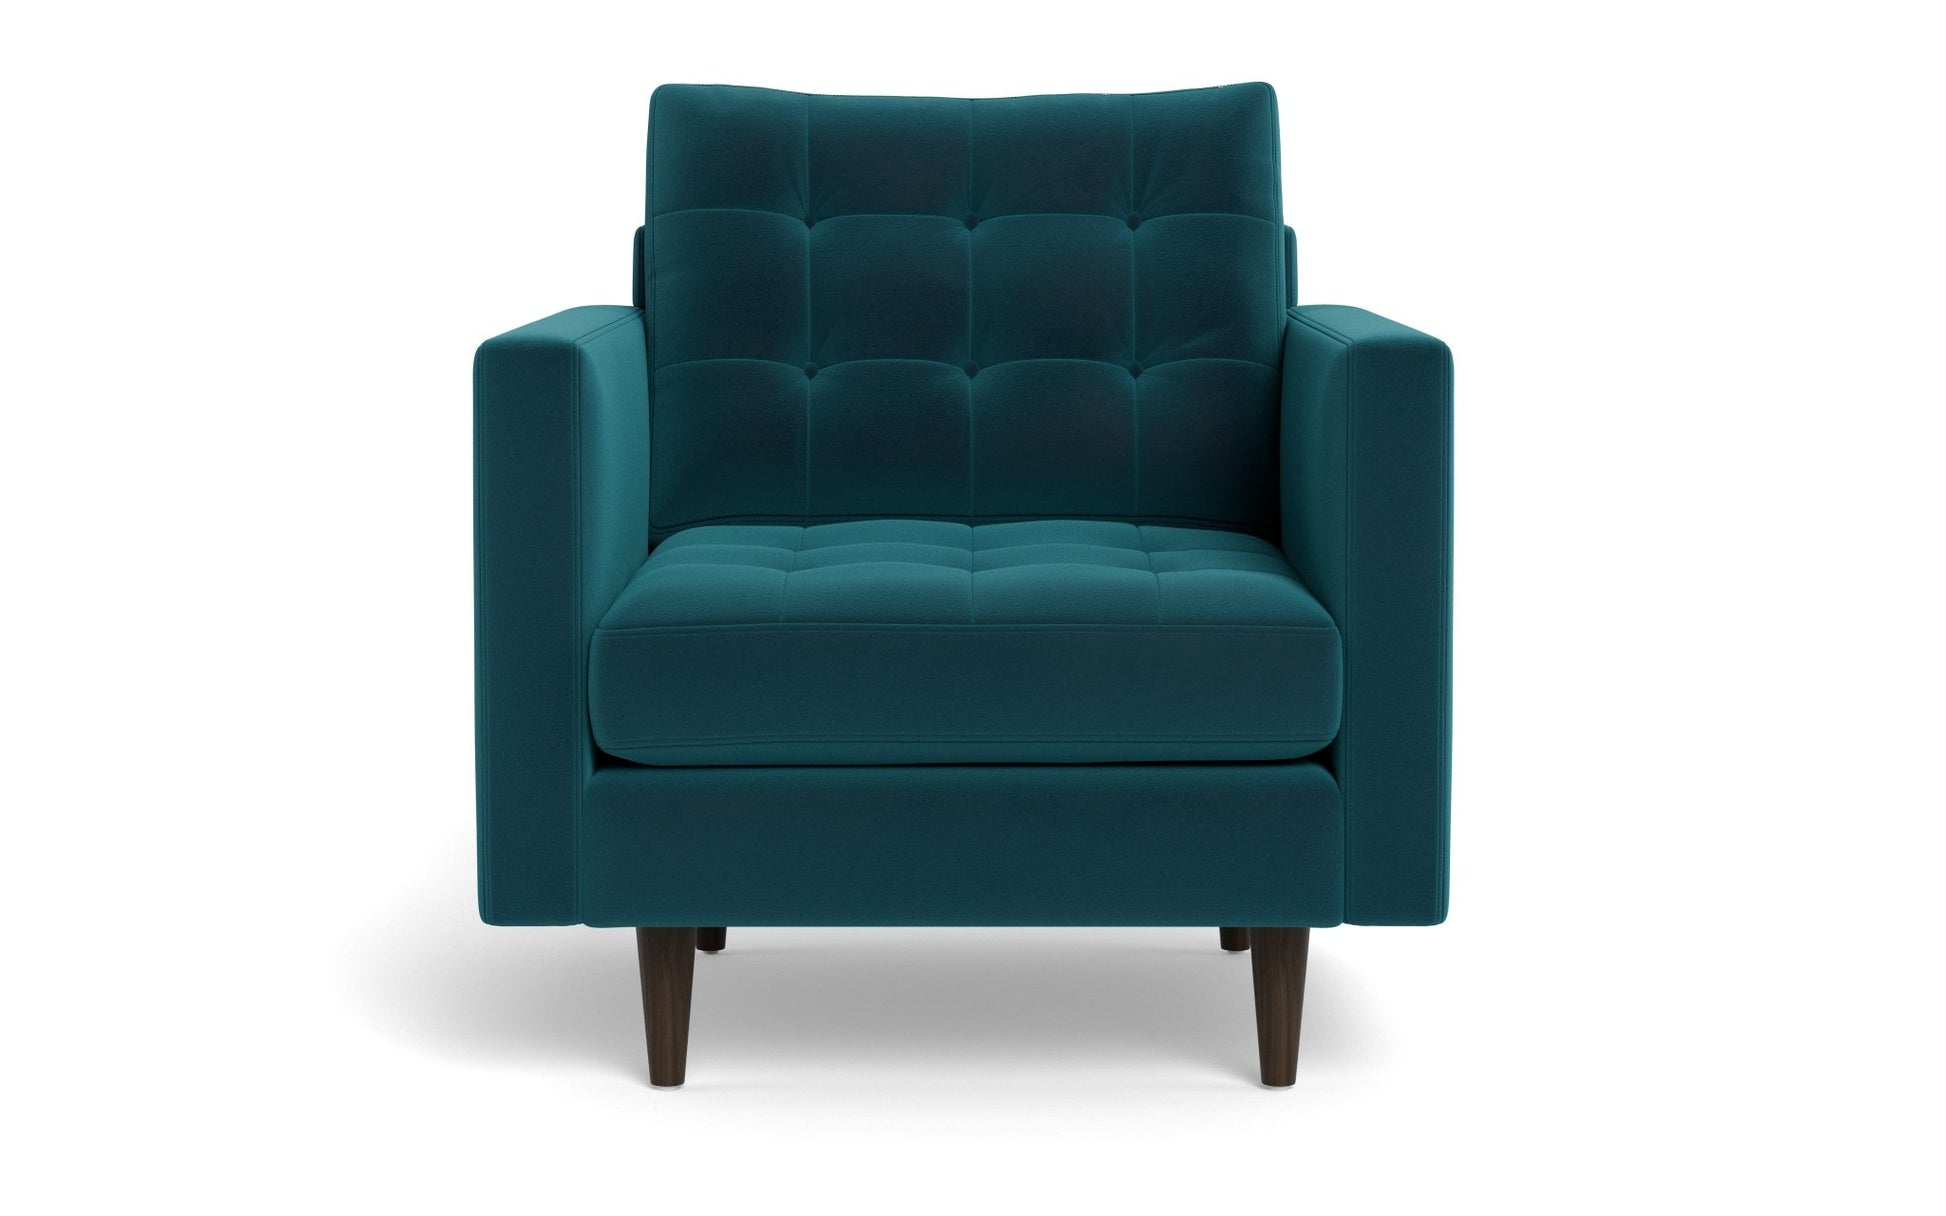 Wallace Chair - Superb Peacock